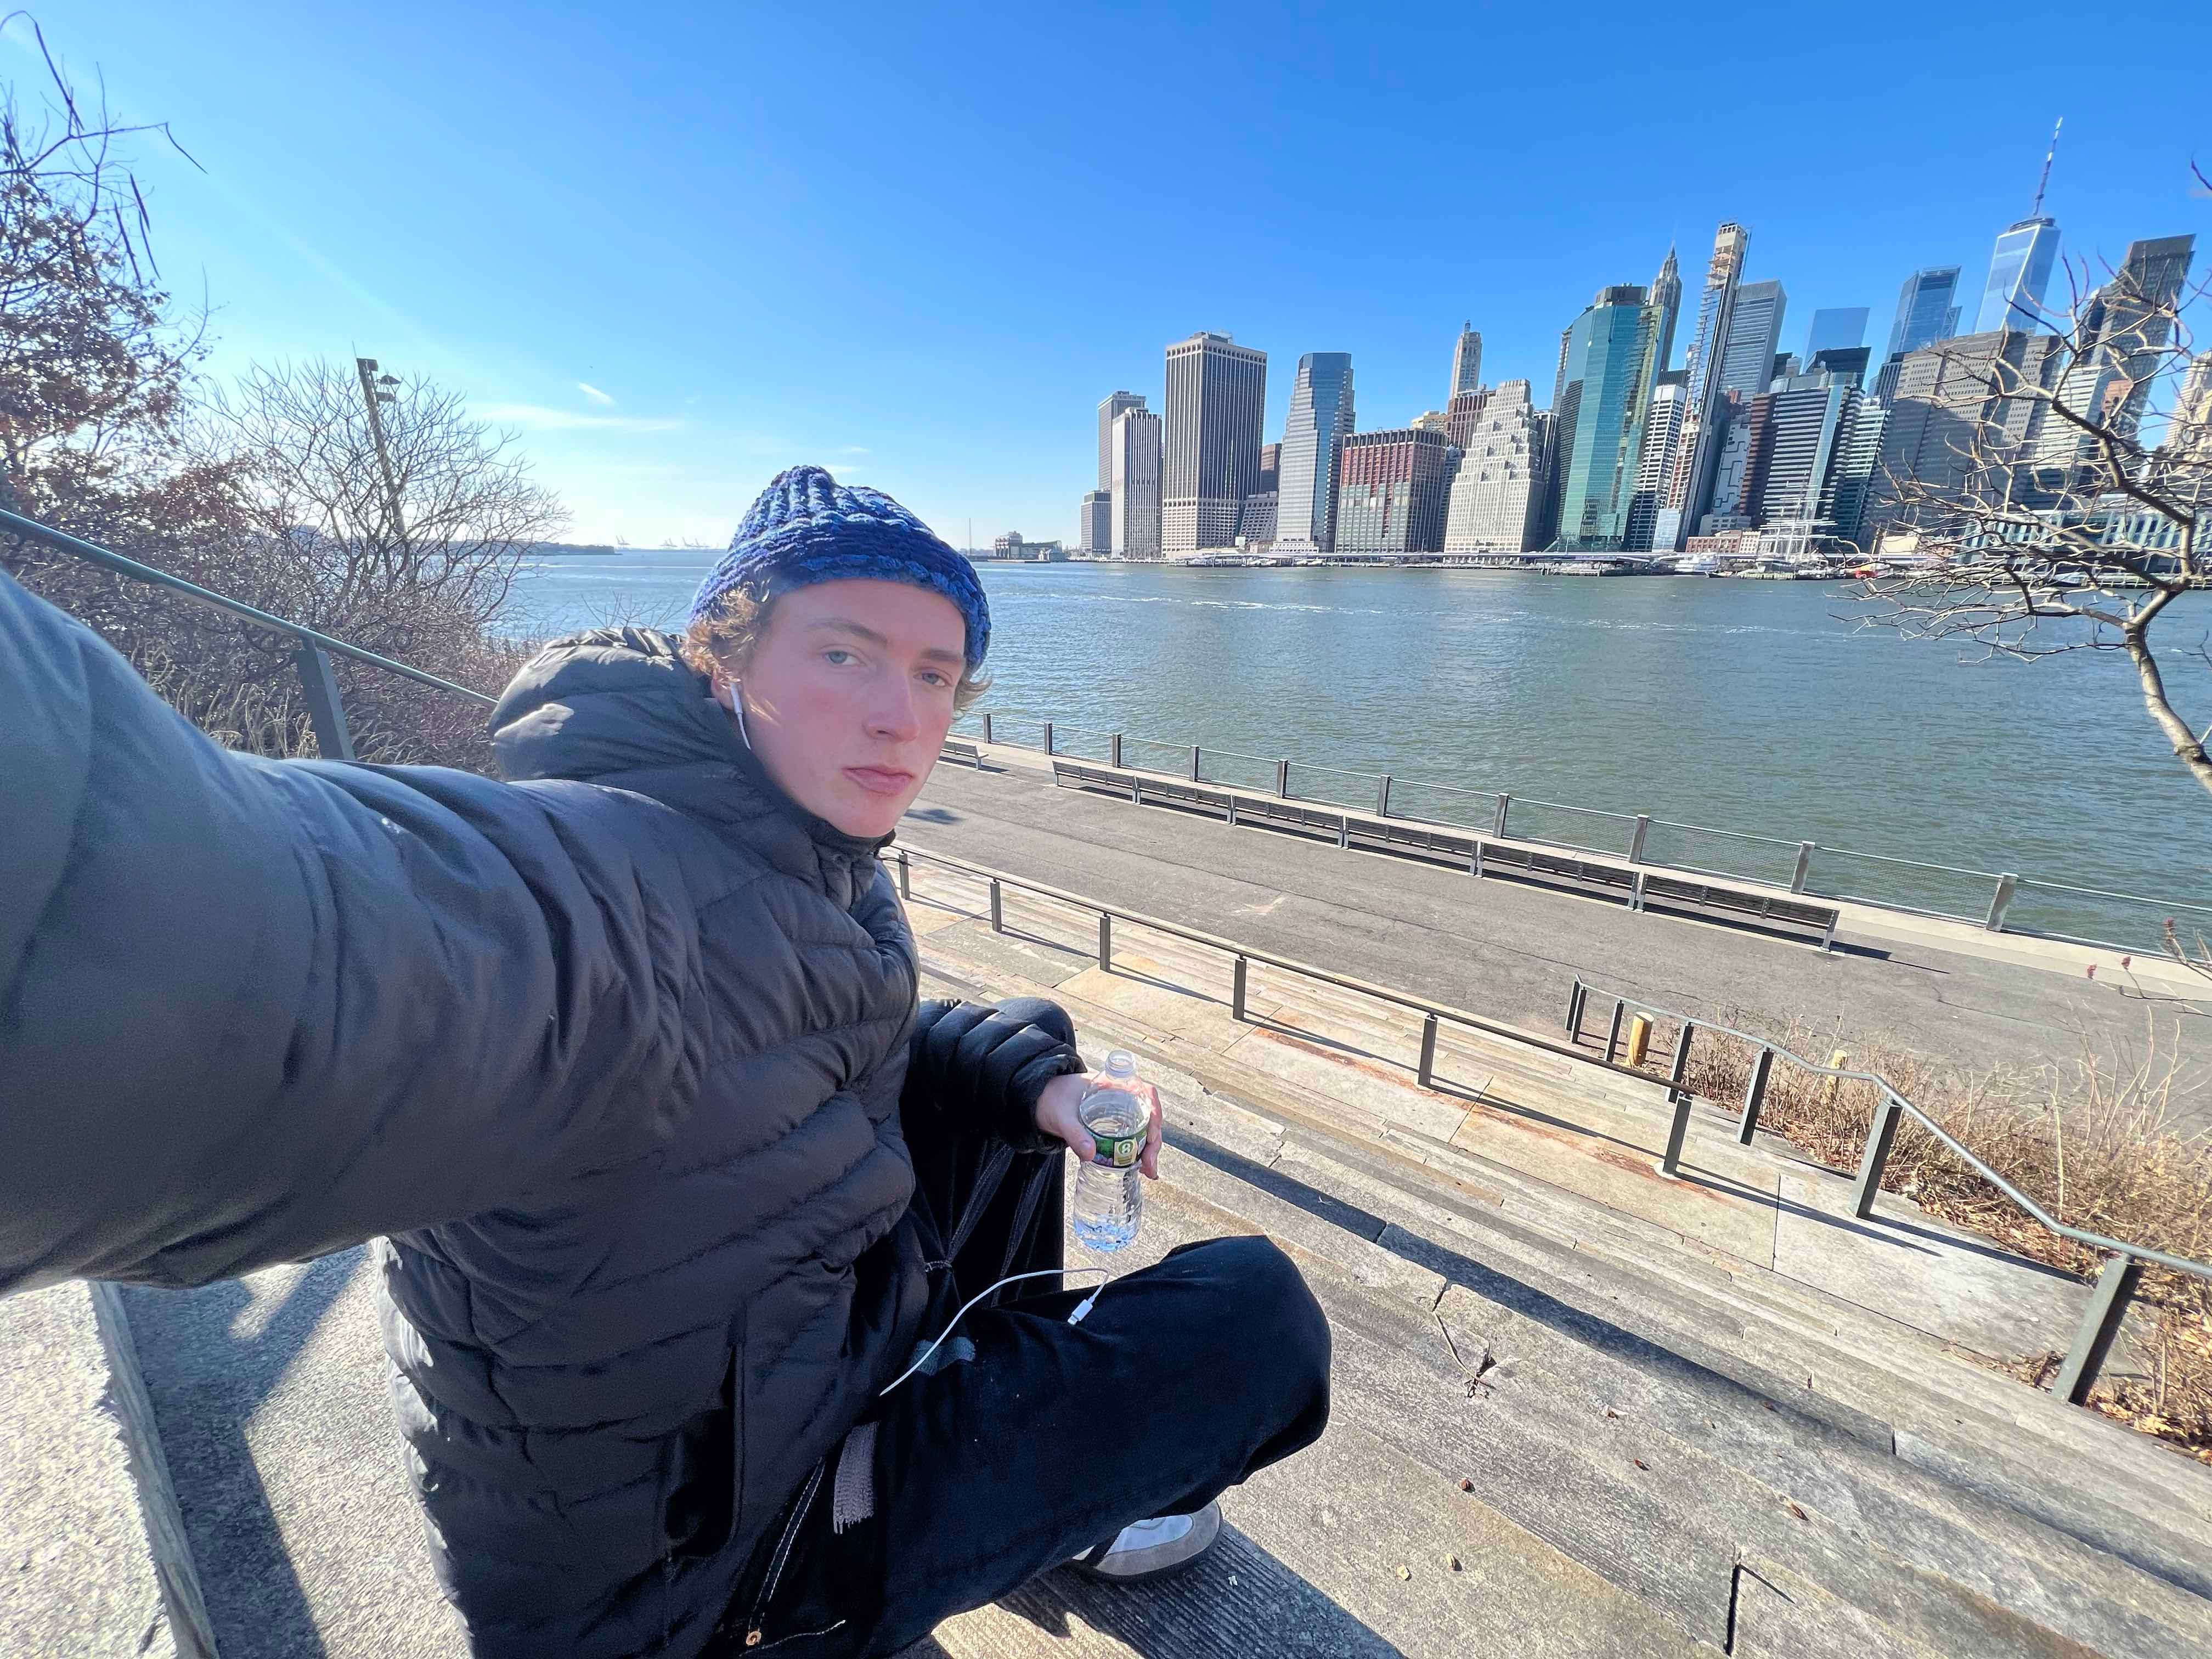 A young man takes a selfie across the water from Manhattan island.